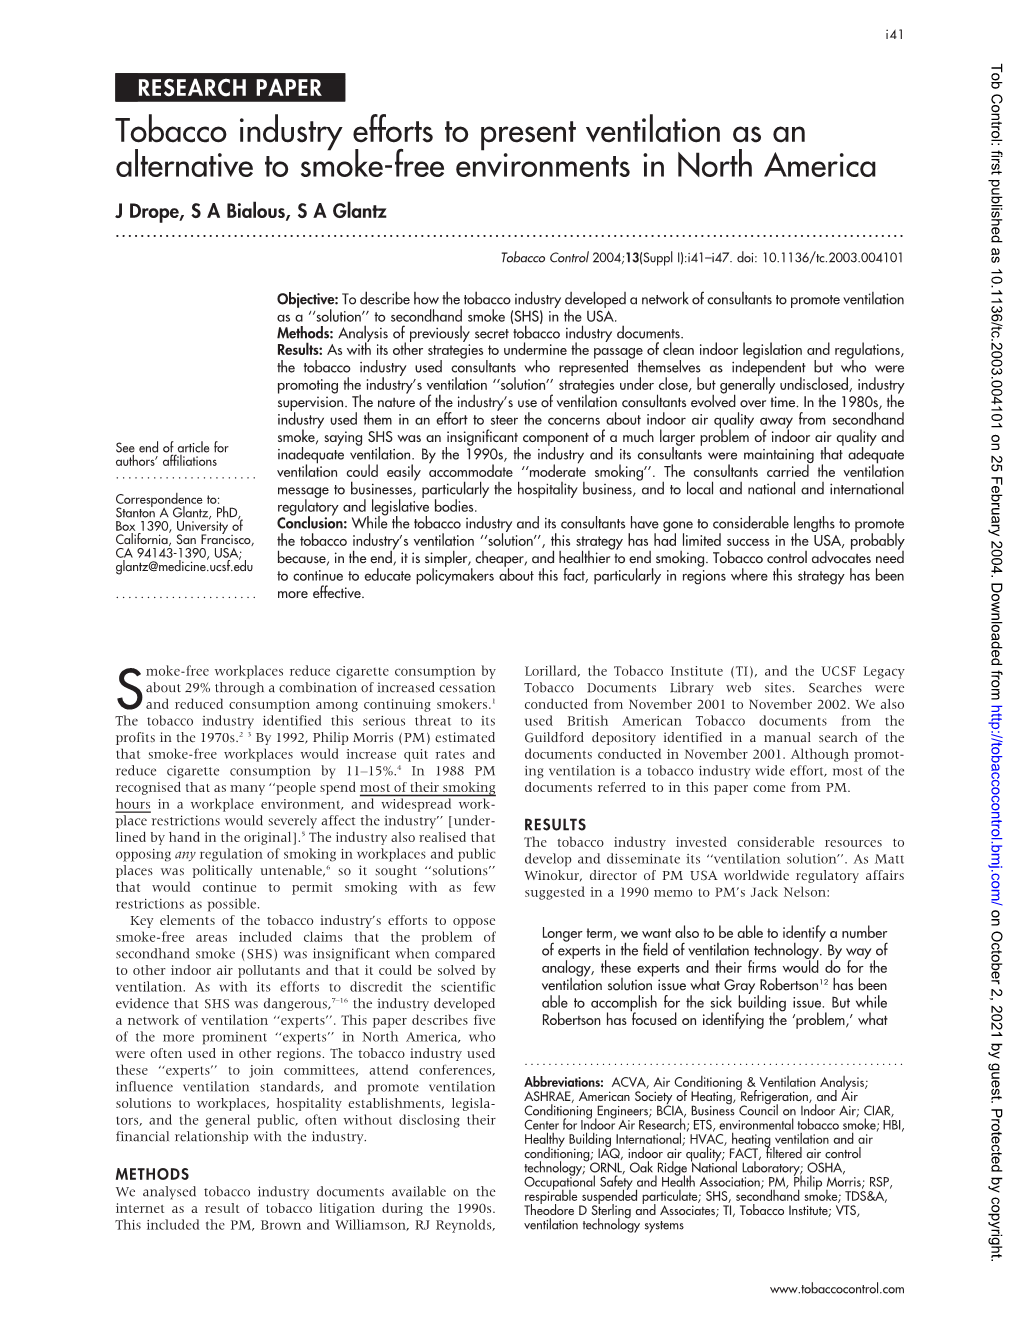 Tobacco Industry Efforts to Present Ventilation As an Alternative to Smoke-Free Environments in North America J Drope, S a Bialous, S a Glantz